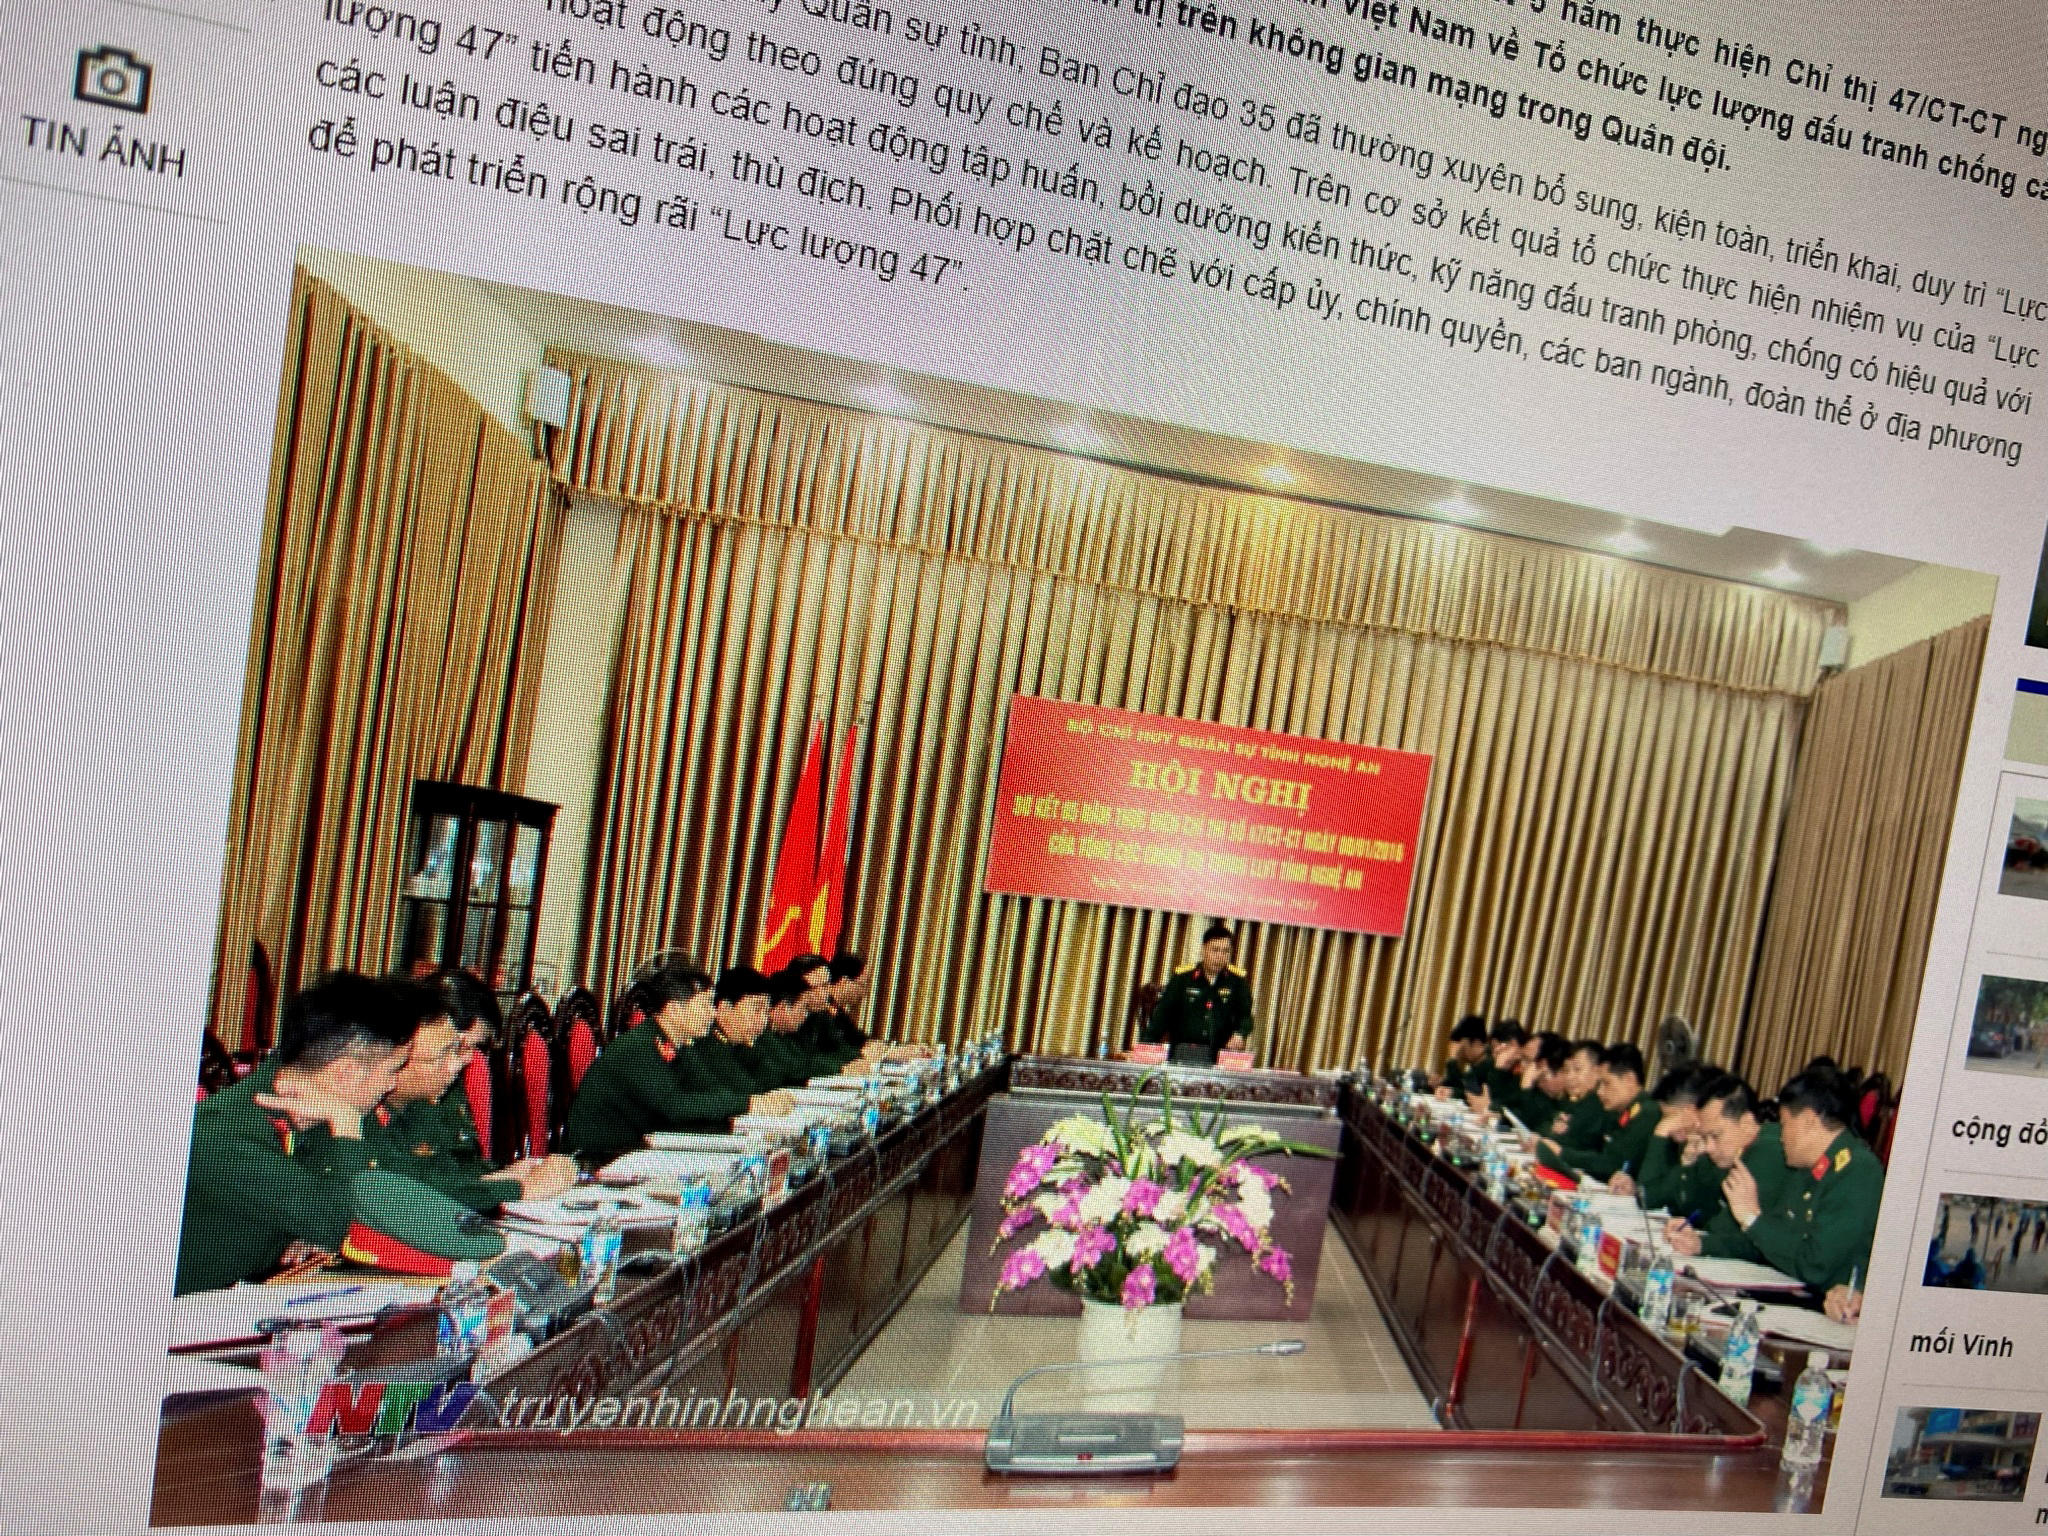 A state media article from March 17, 2021 with a picture of a meeting marking five years since the creation of Vietnam's 'Force 47' cyber army is displayed on screen in this picture takenJuly 8, 2021. TRUYENHINHNGHEAN.VN via REUTERS 